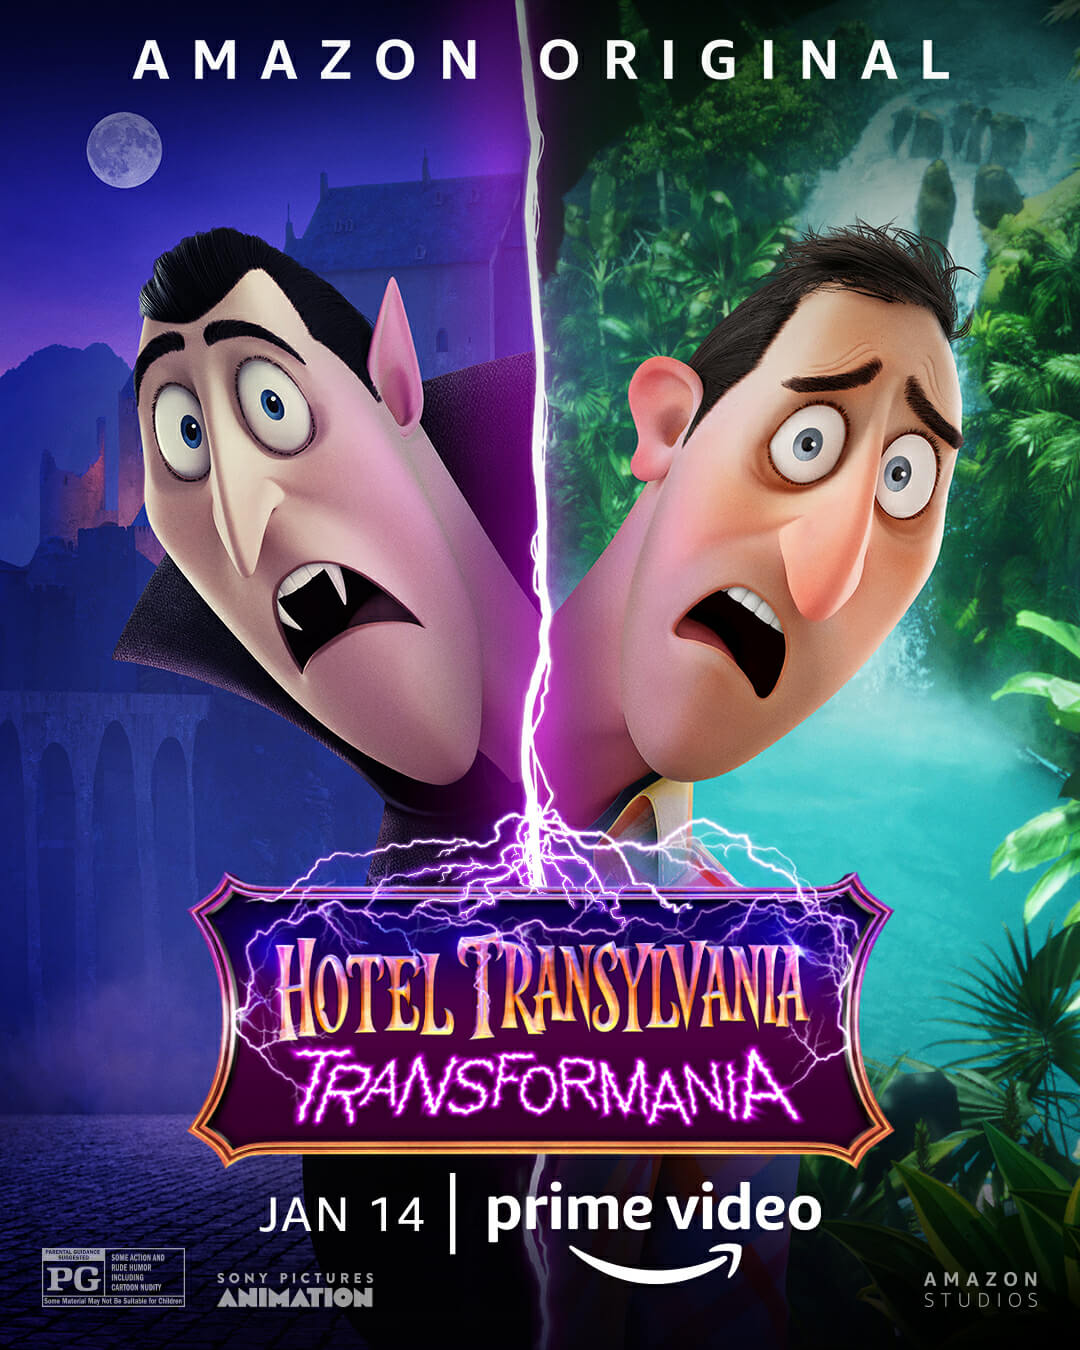 Animated movie Hotel Transylvania 4 Transformania released character posters-1